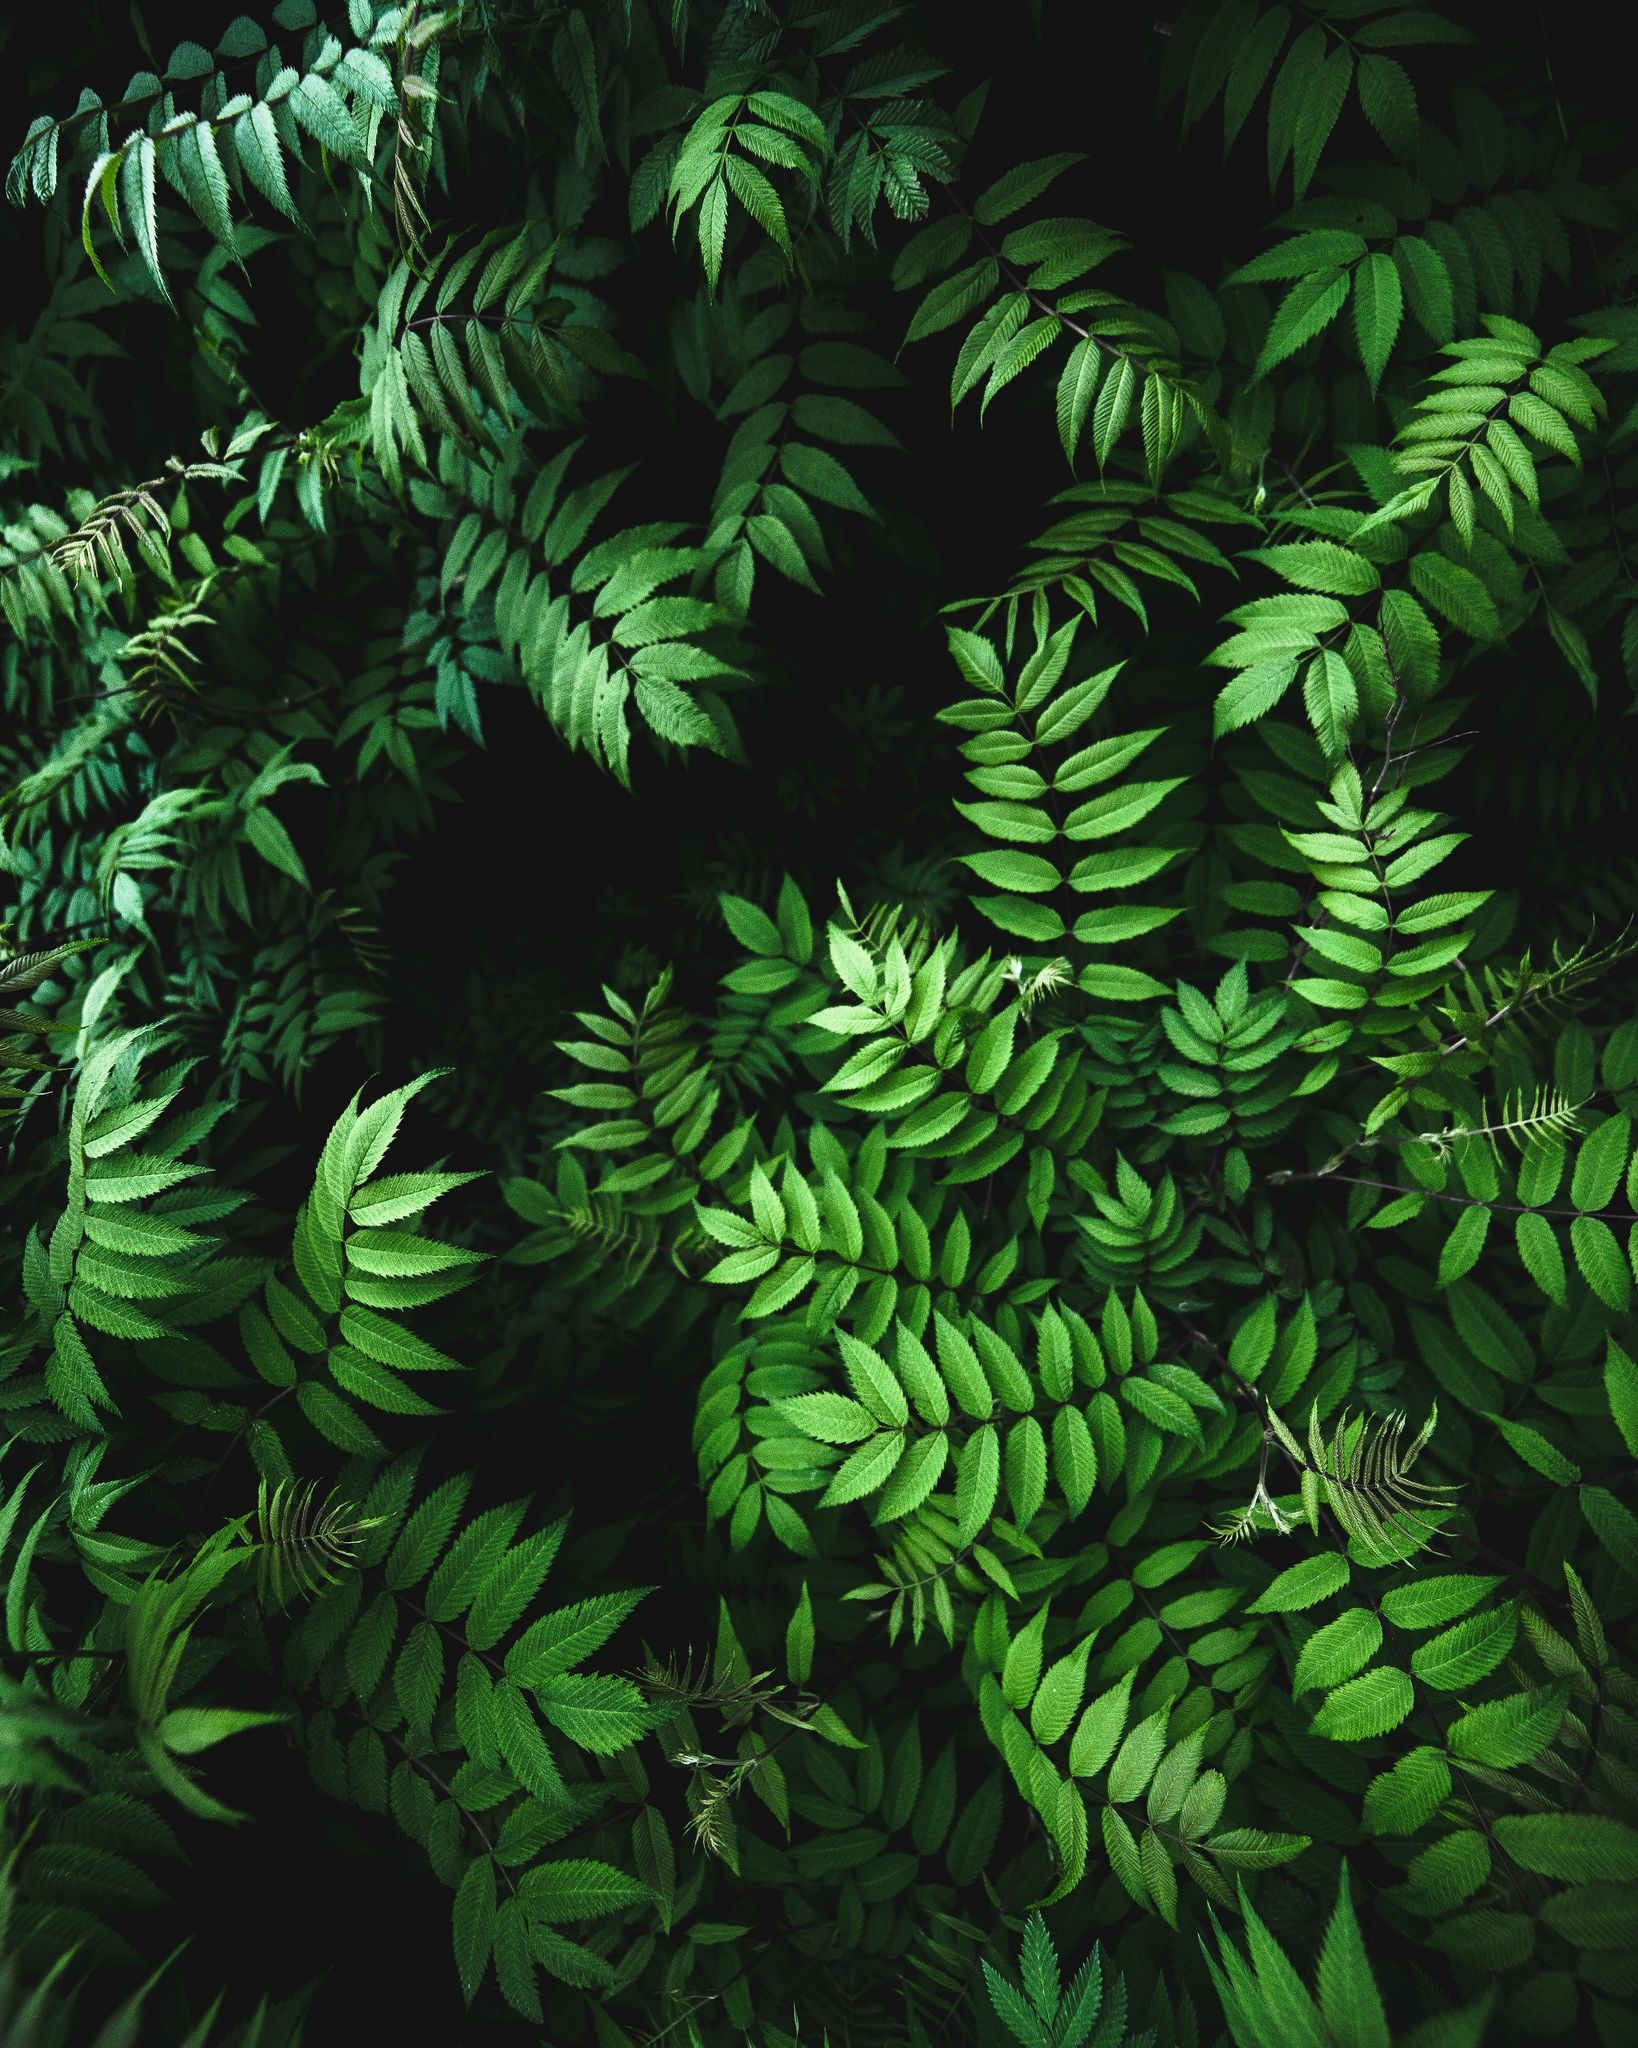 Green Leaf: Evergreen jungle forest, A group of compound fern leaves, Vascular plants. 1640x2050 HD Wallpaper.